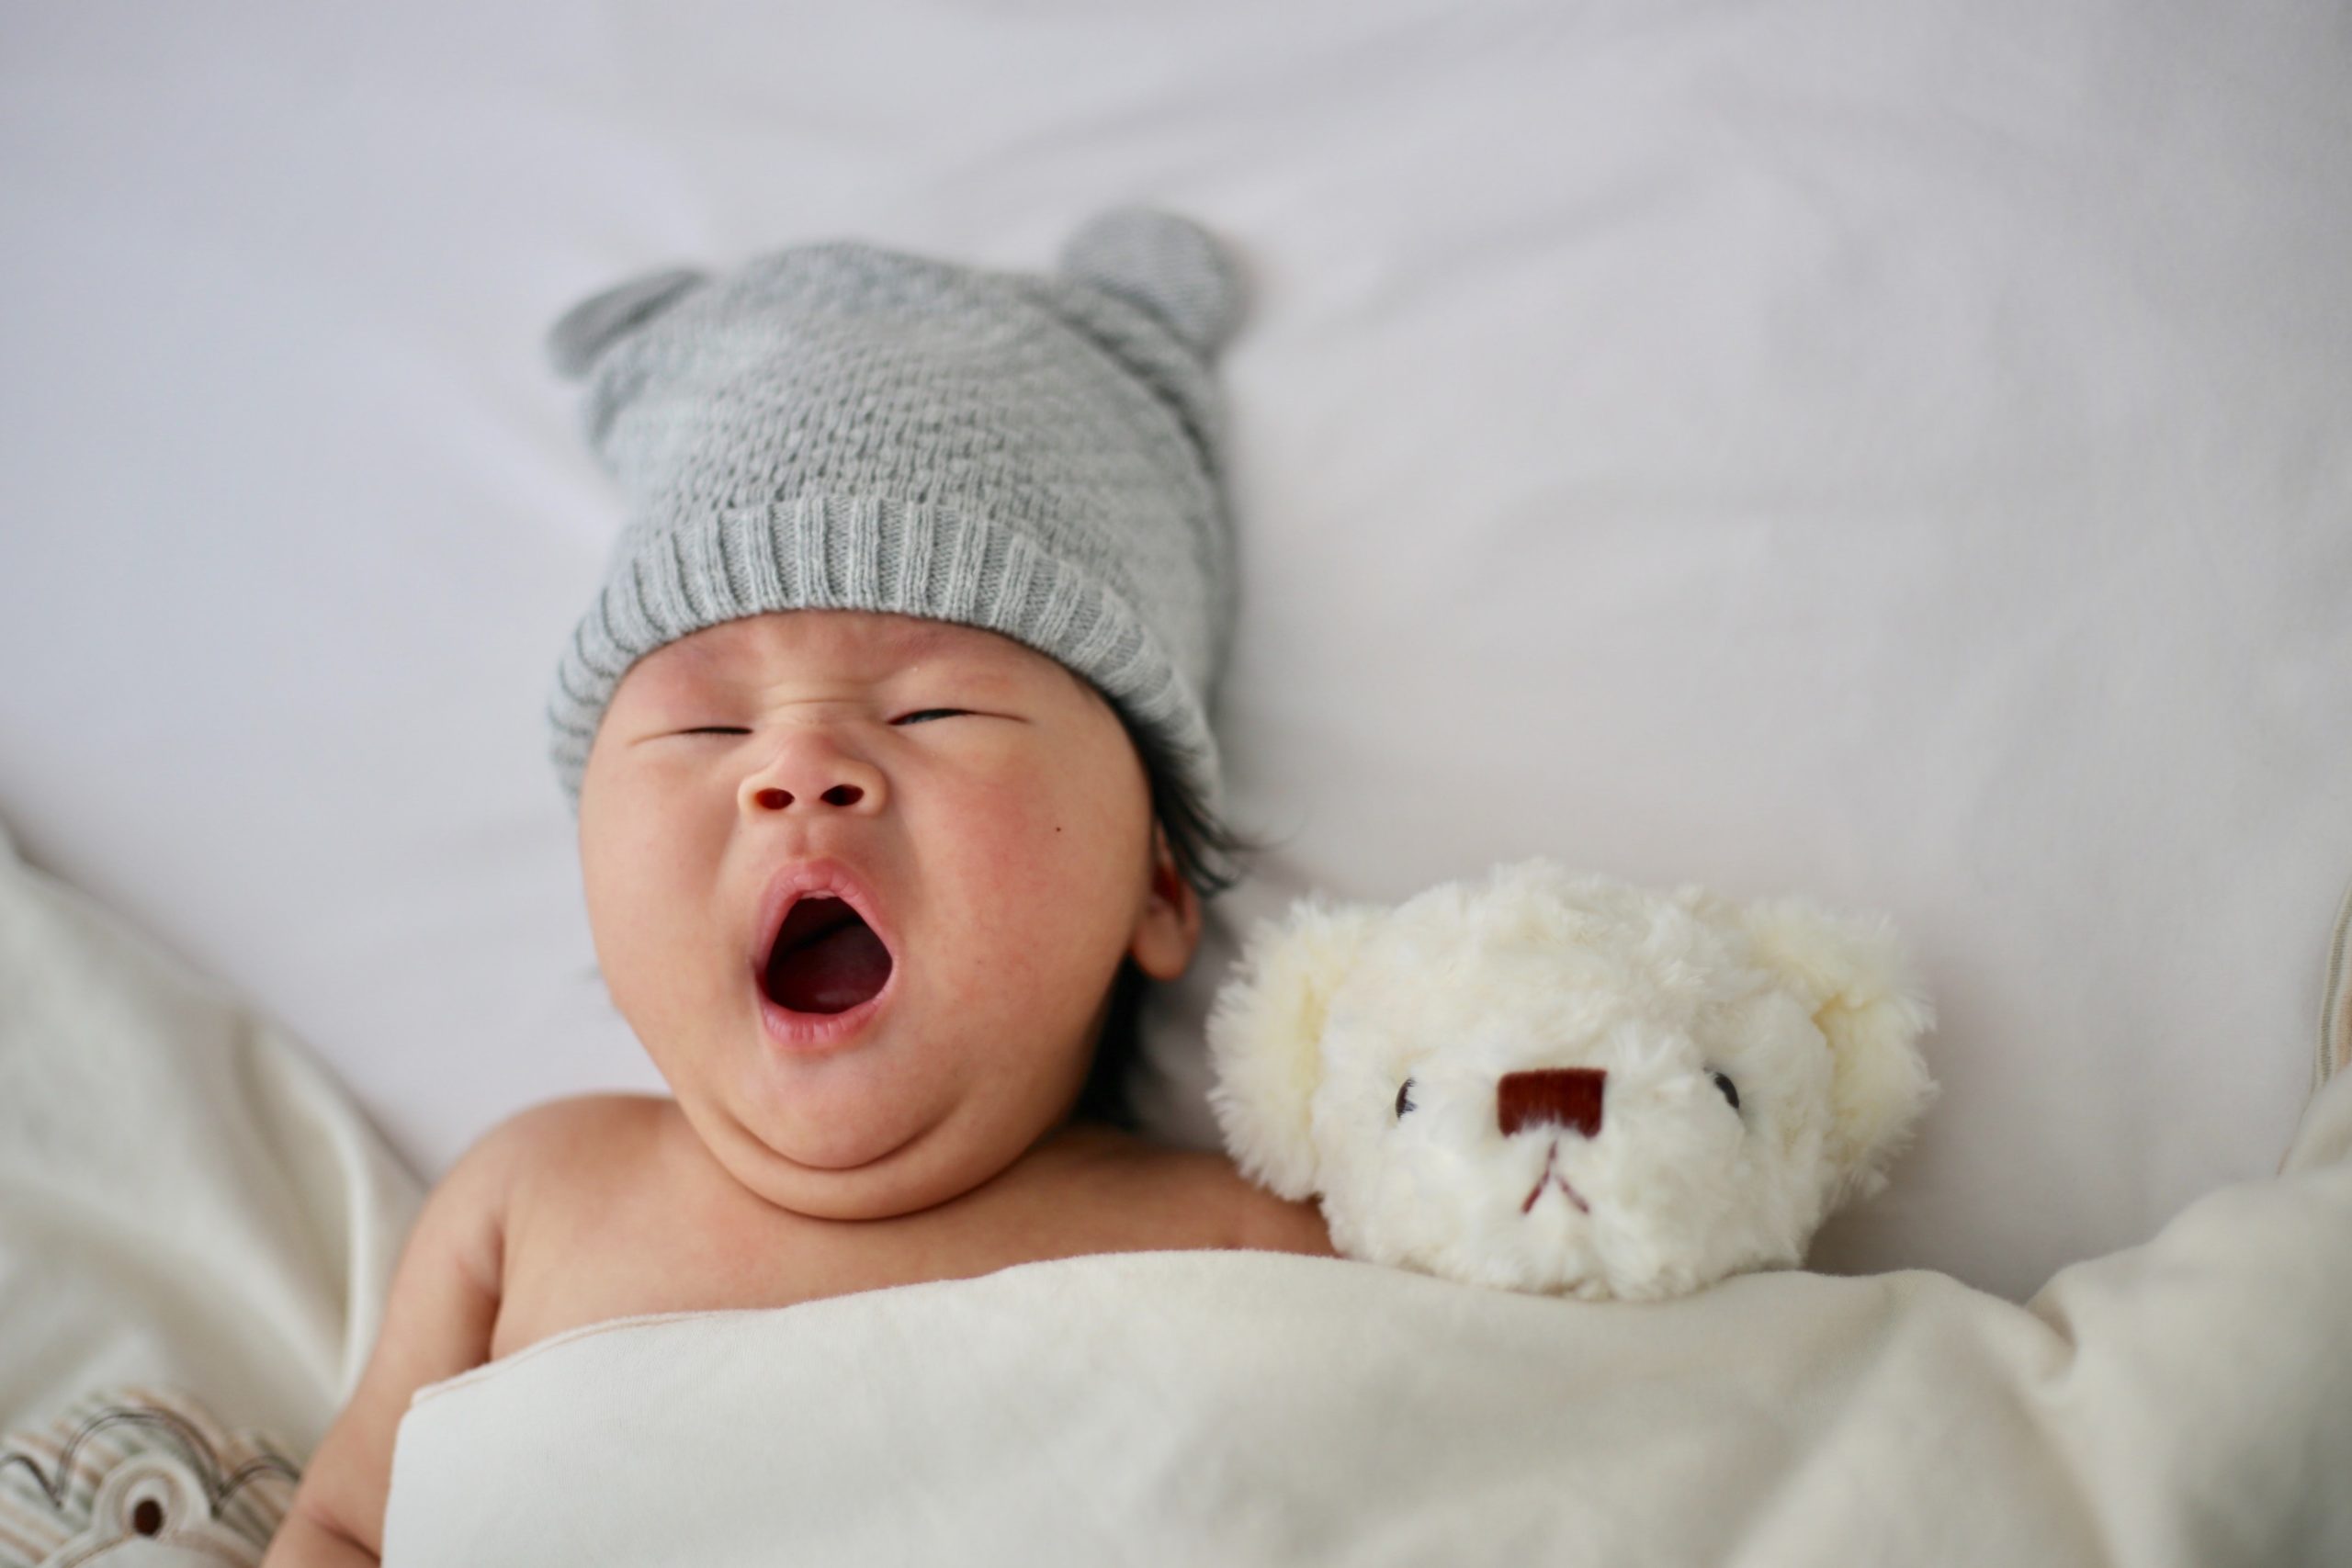 baby yawning wearing a cap and sleeping next to a stuffed animal